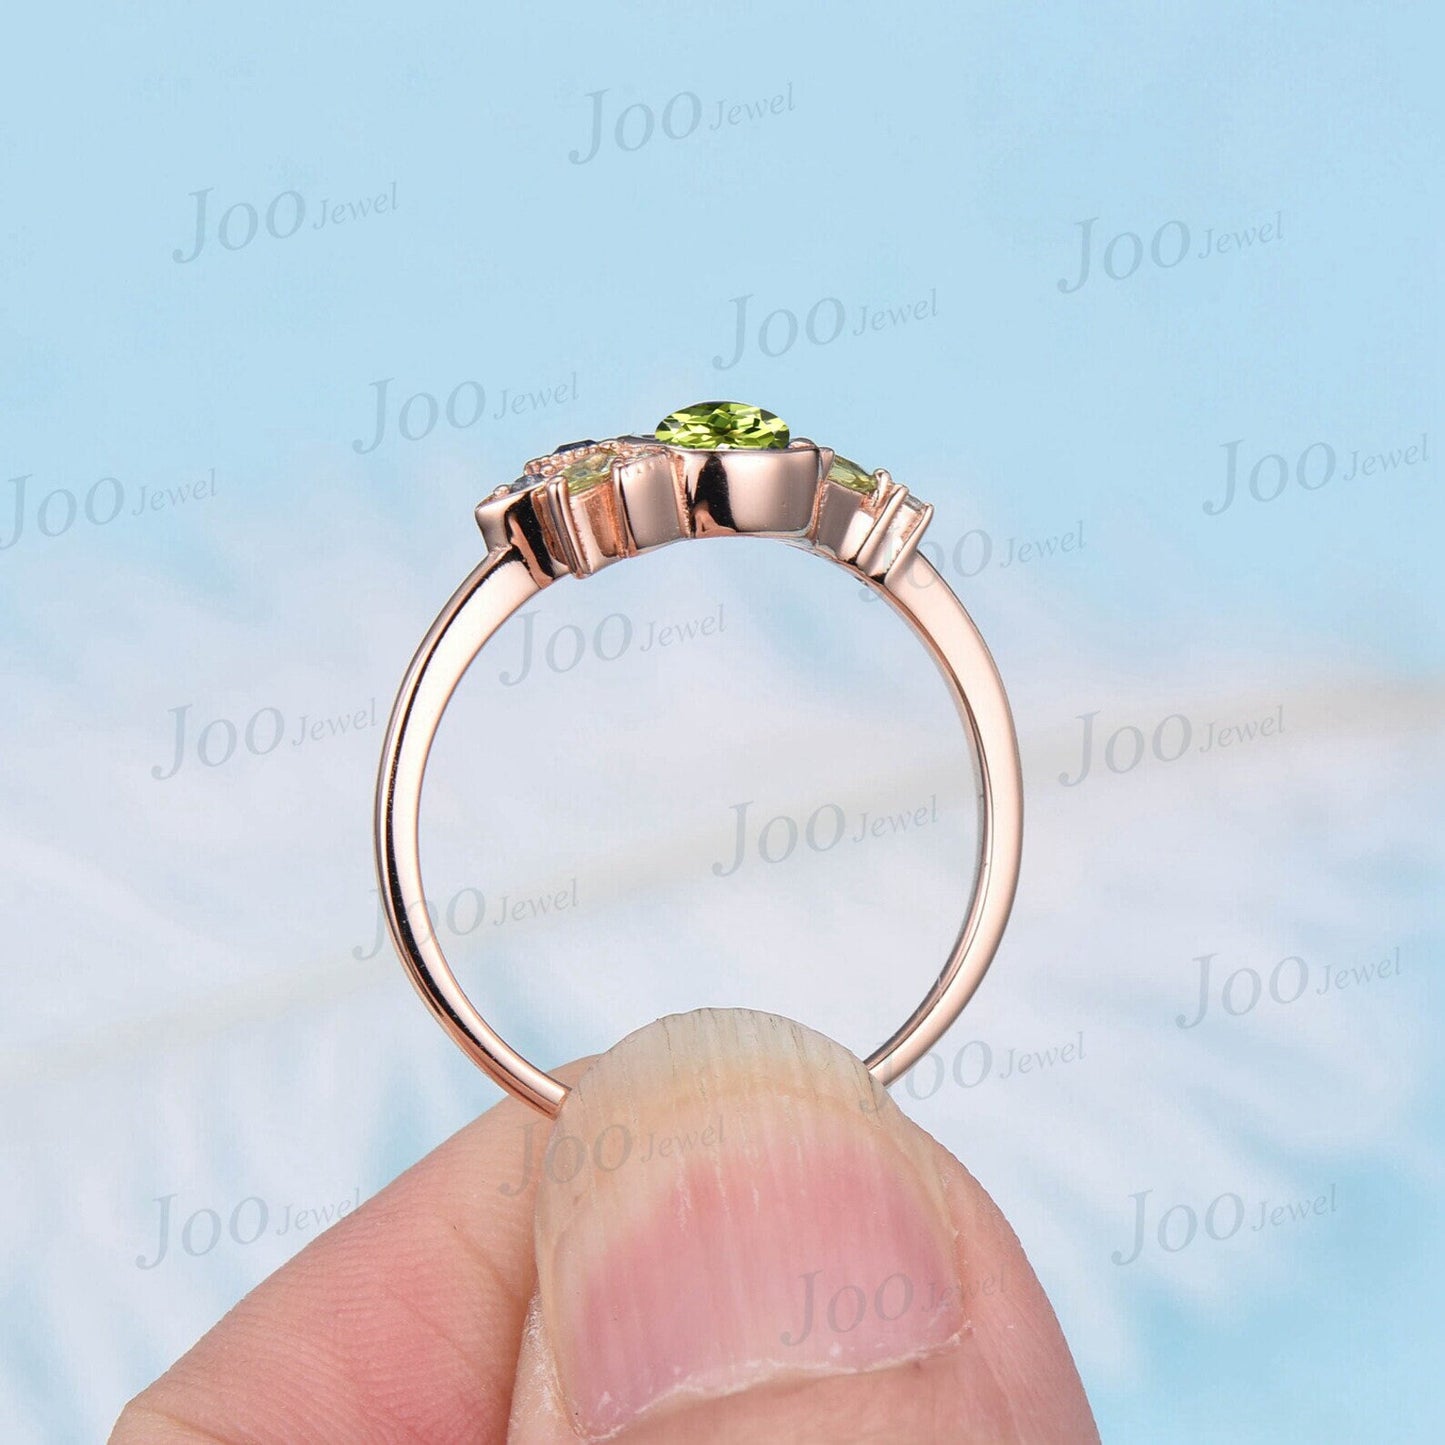 5mm Round Cut Natural Peridot Ring Green Gemstone Jewelry August Birthstone Moon Cluster Wedding Ring Personalized Anniversary/Birthday Gift